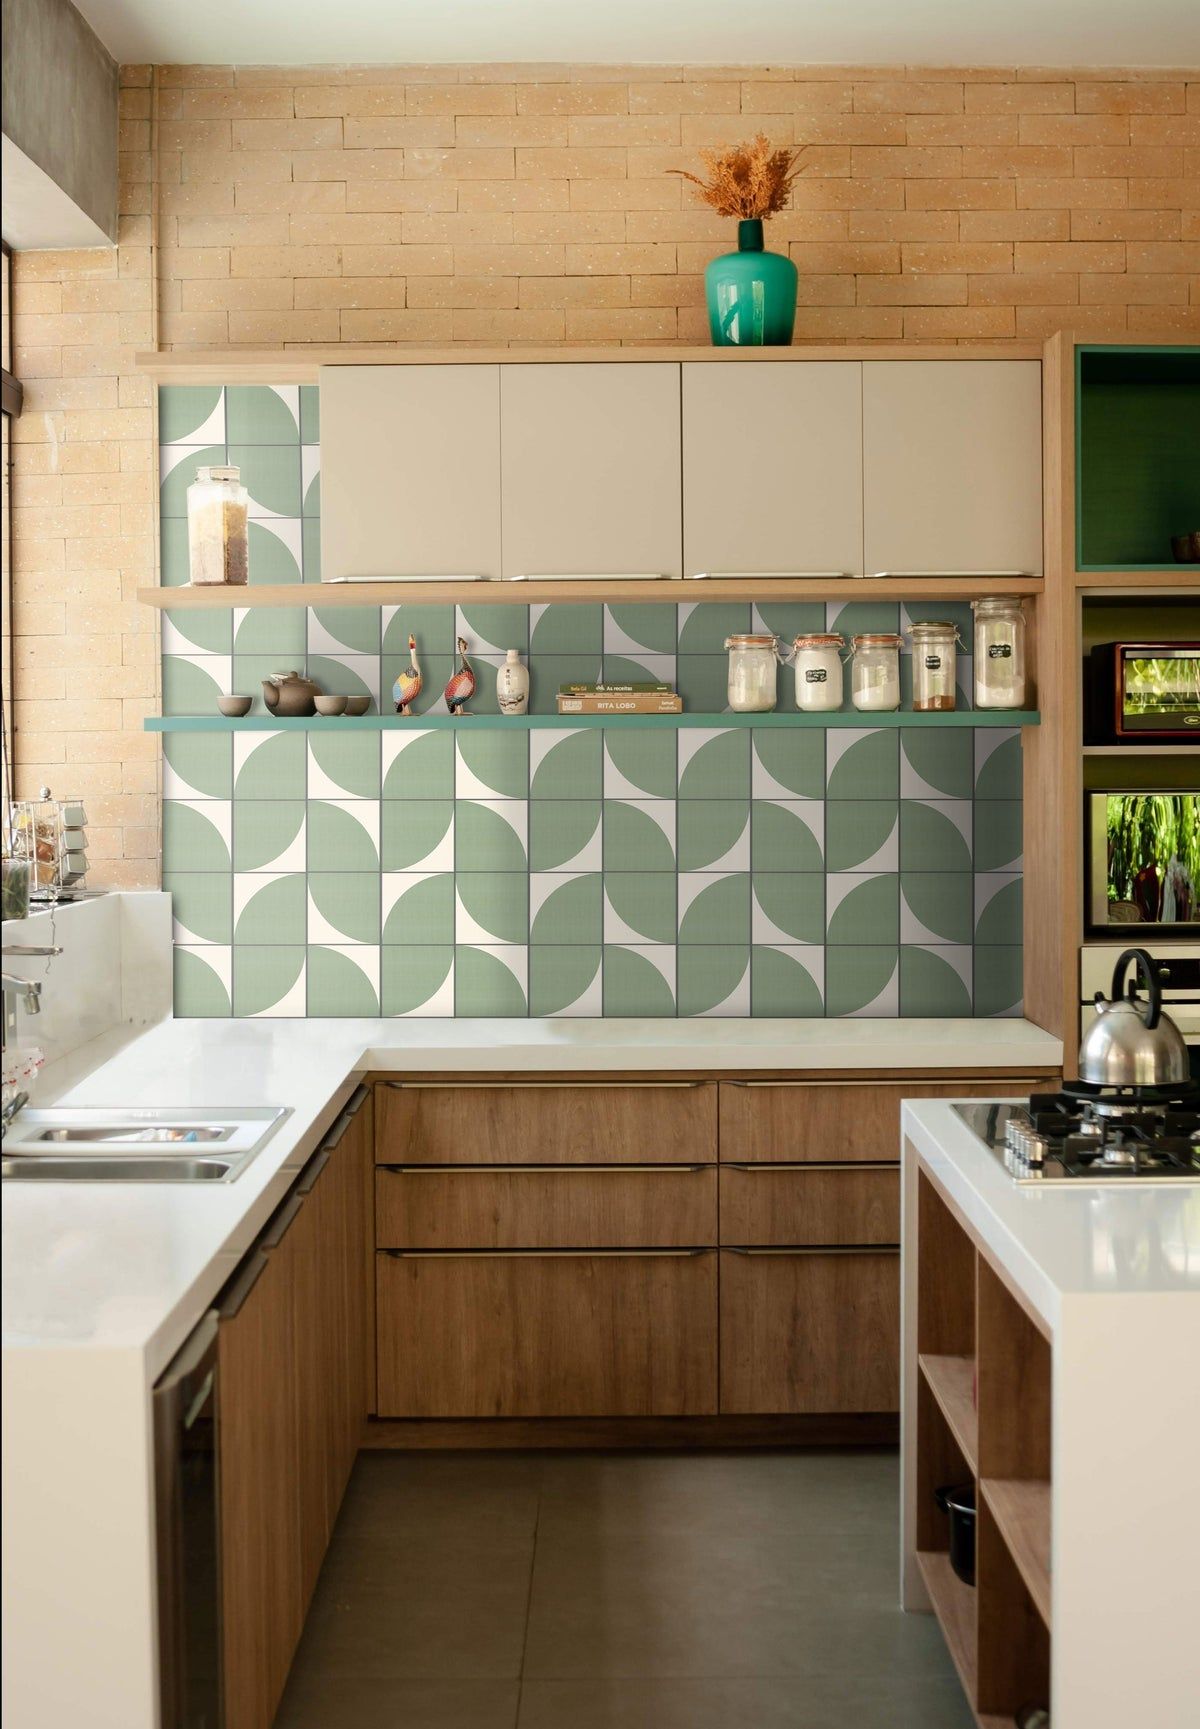 Kitchen Tiles Designs: Enhance Your Kitchen’s Aesthetic with Stylish and Durable Tile Designs